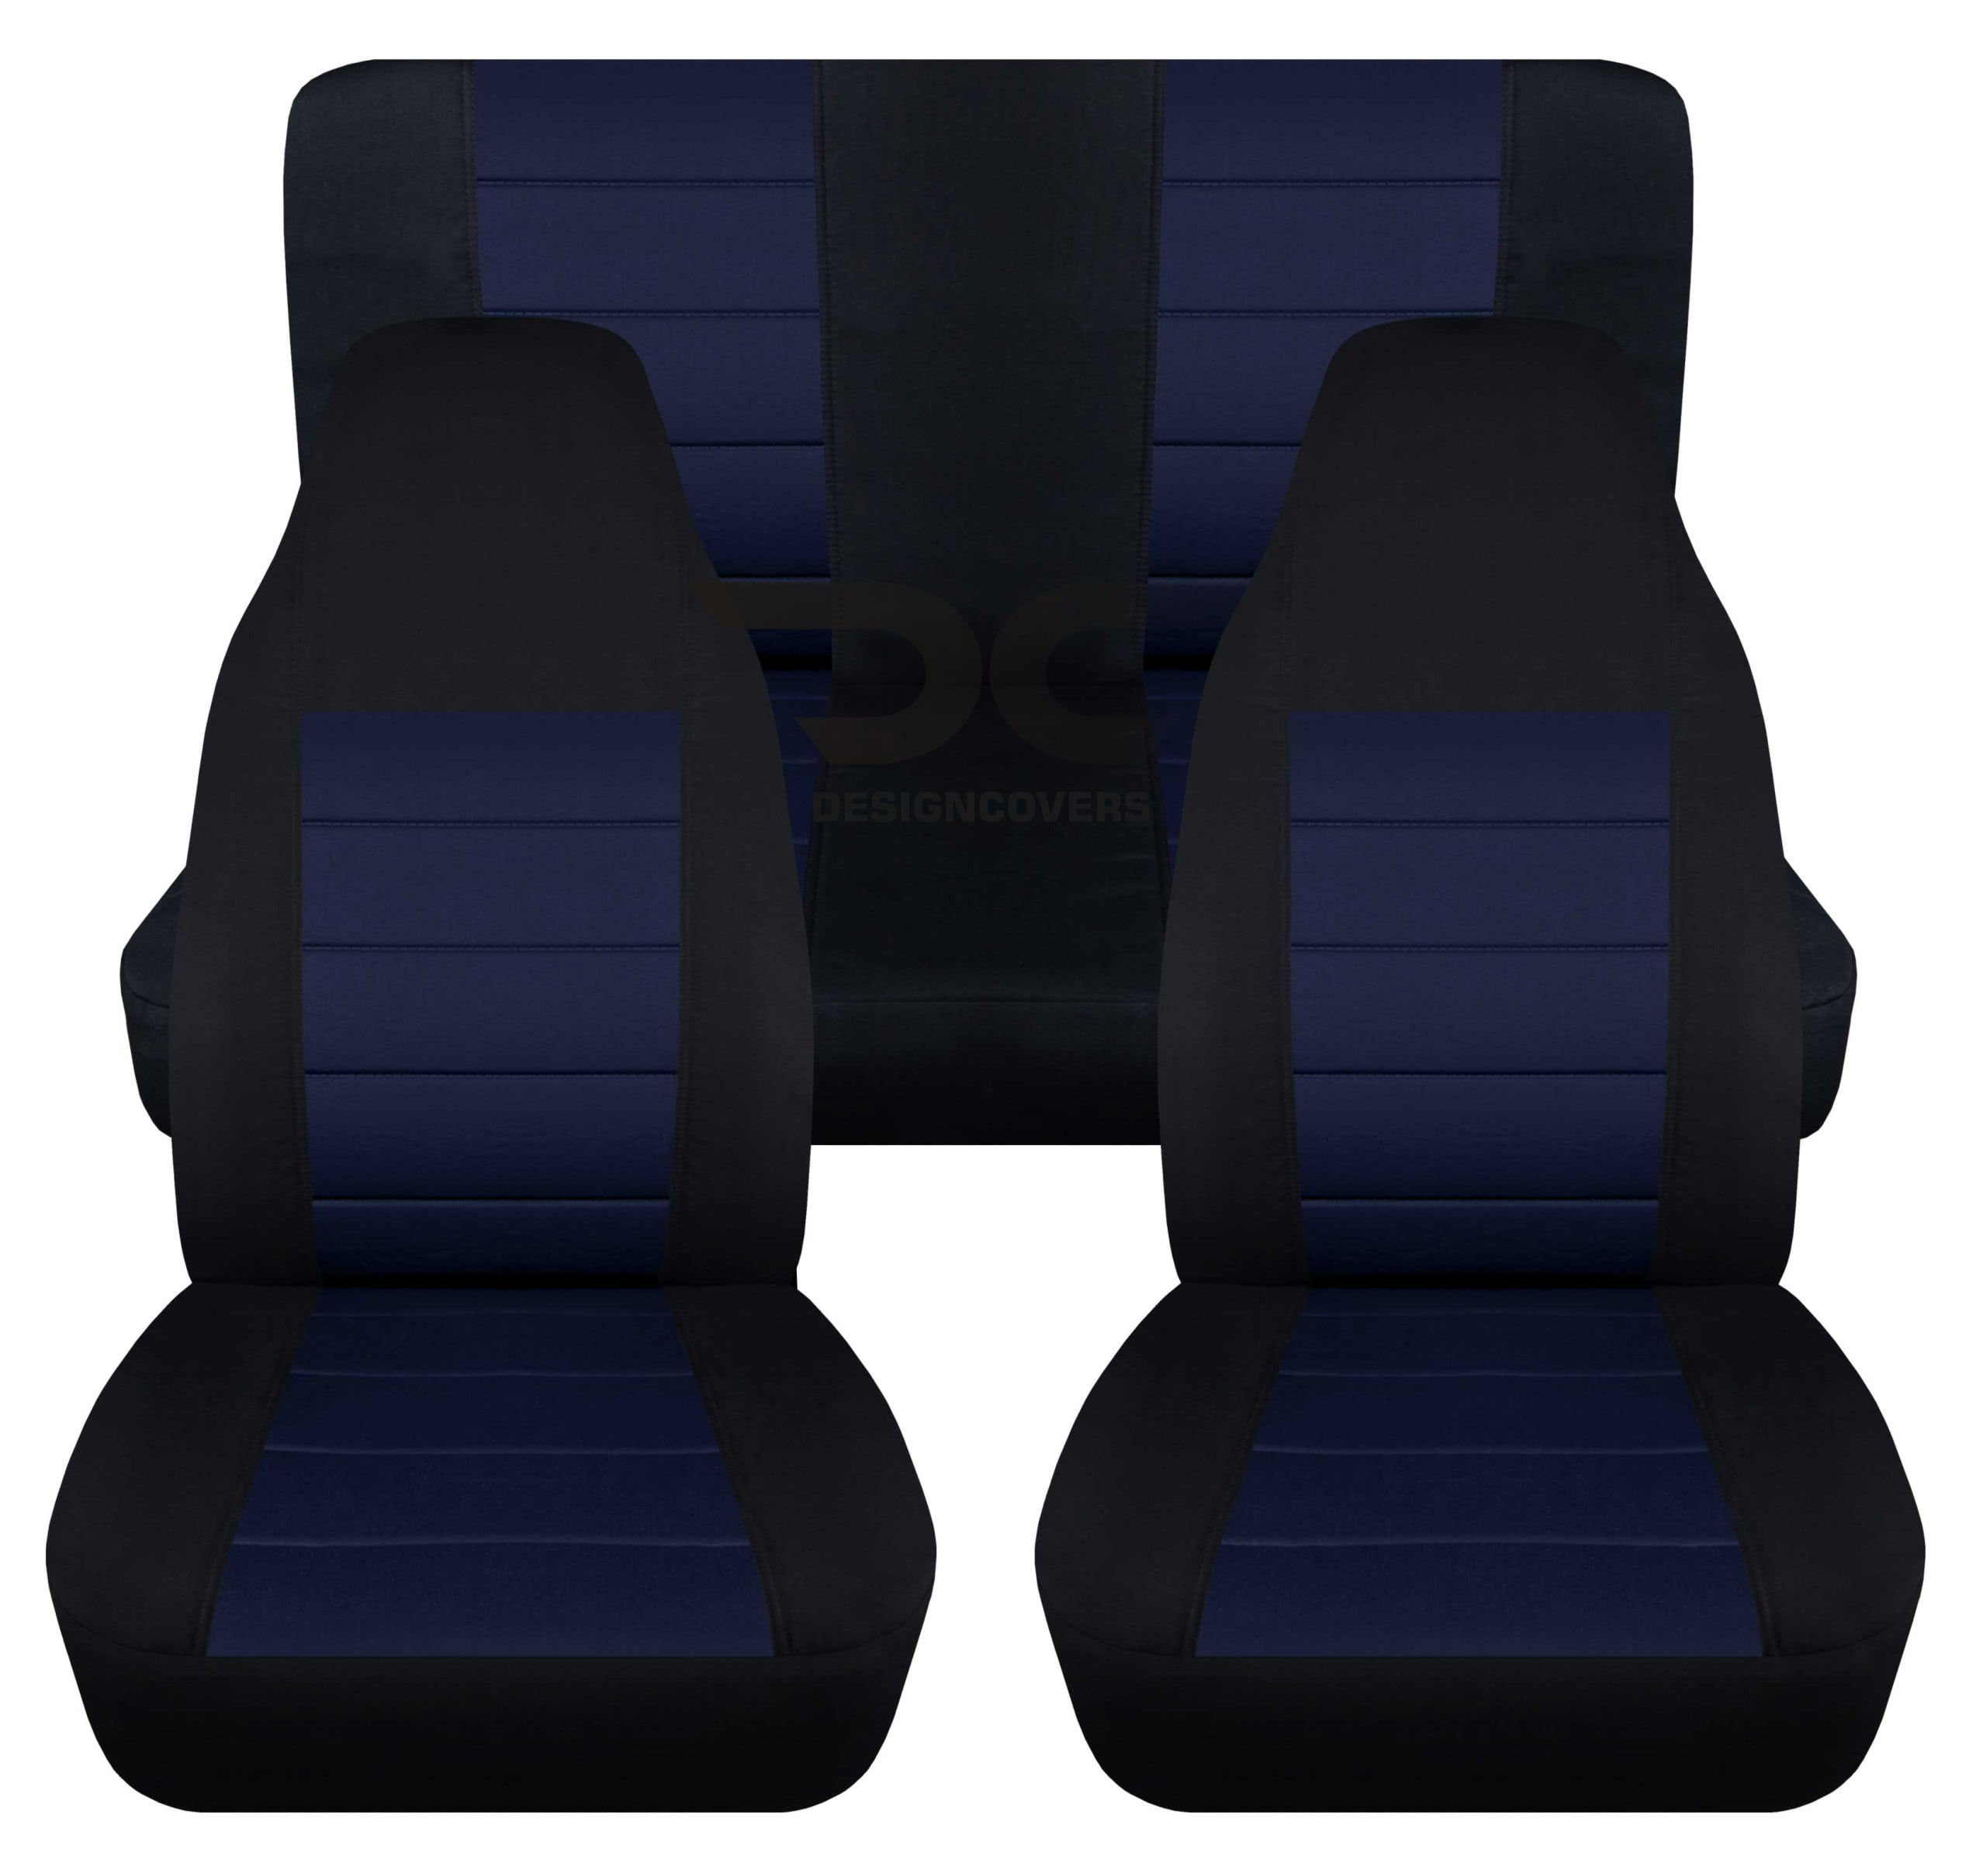 T208-Designcovers Compatible with 1997-2002 Jeep Wrangler TJ 2door Seat  Covers:Black and Navy Blue - Full Set Front&Rear 